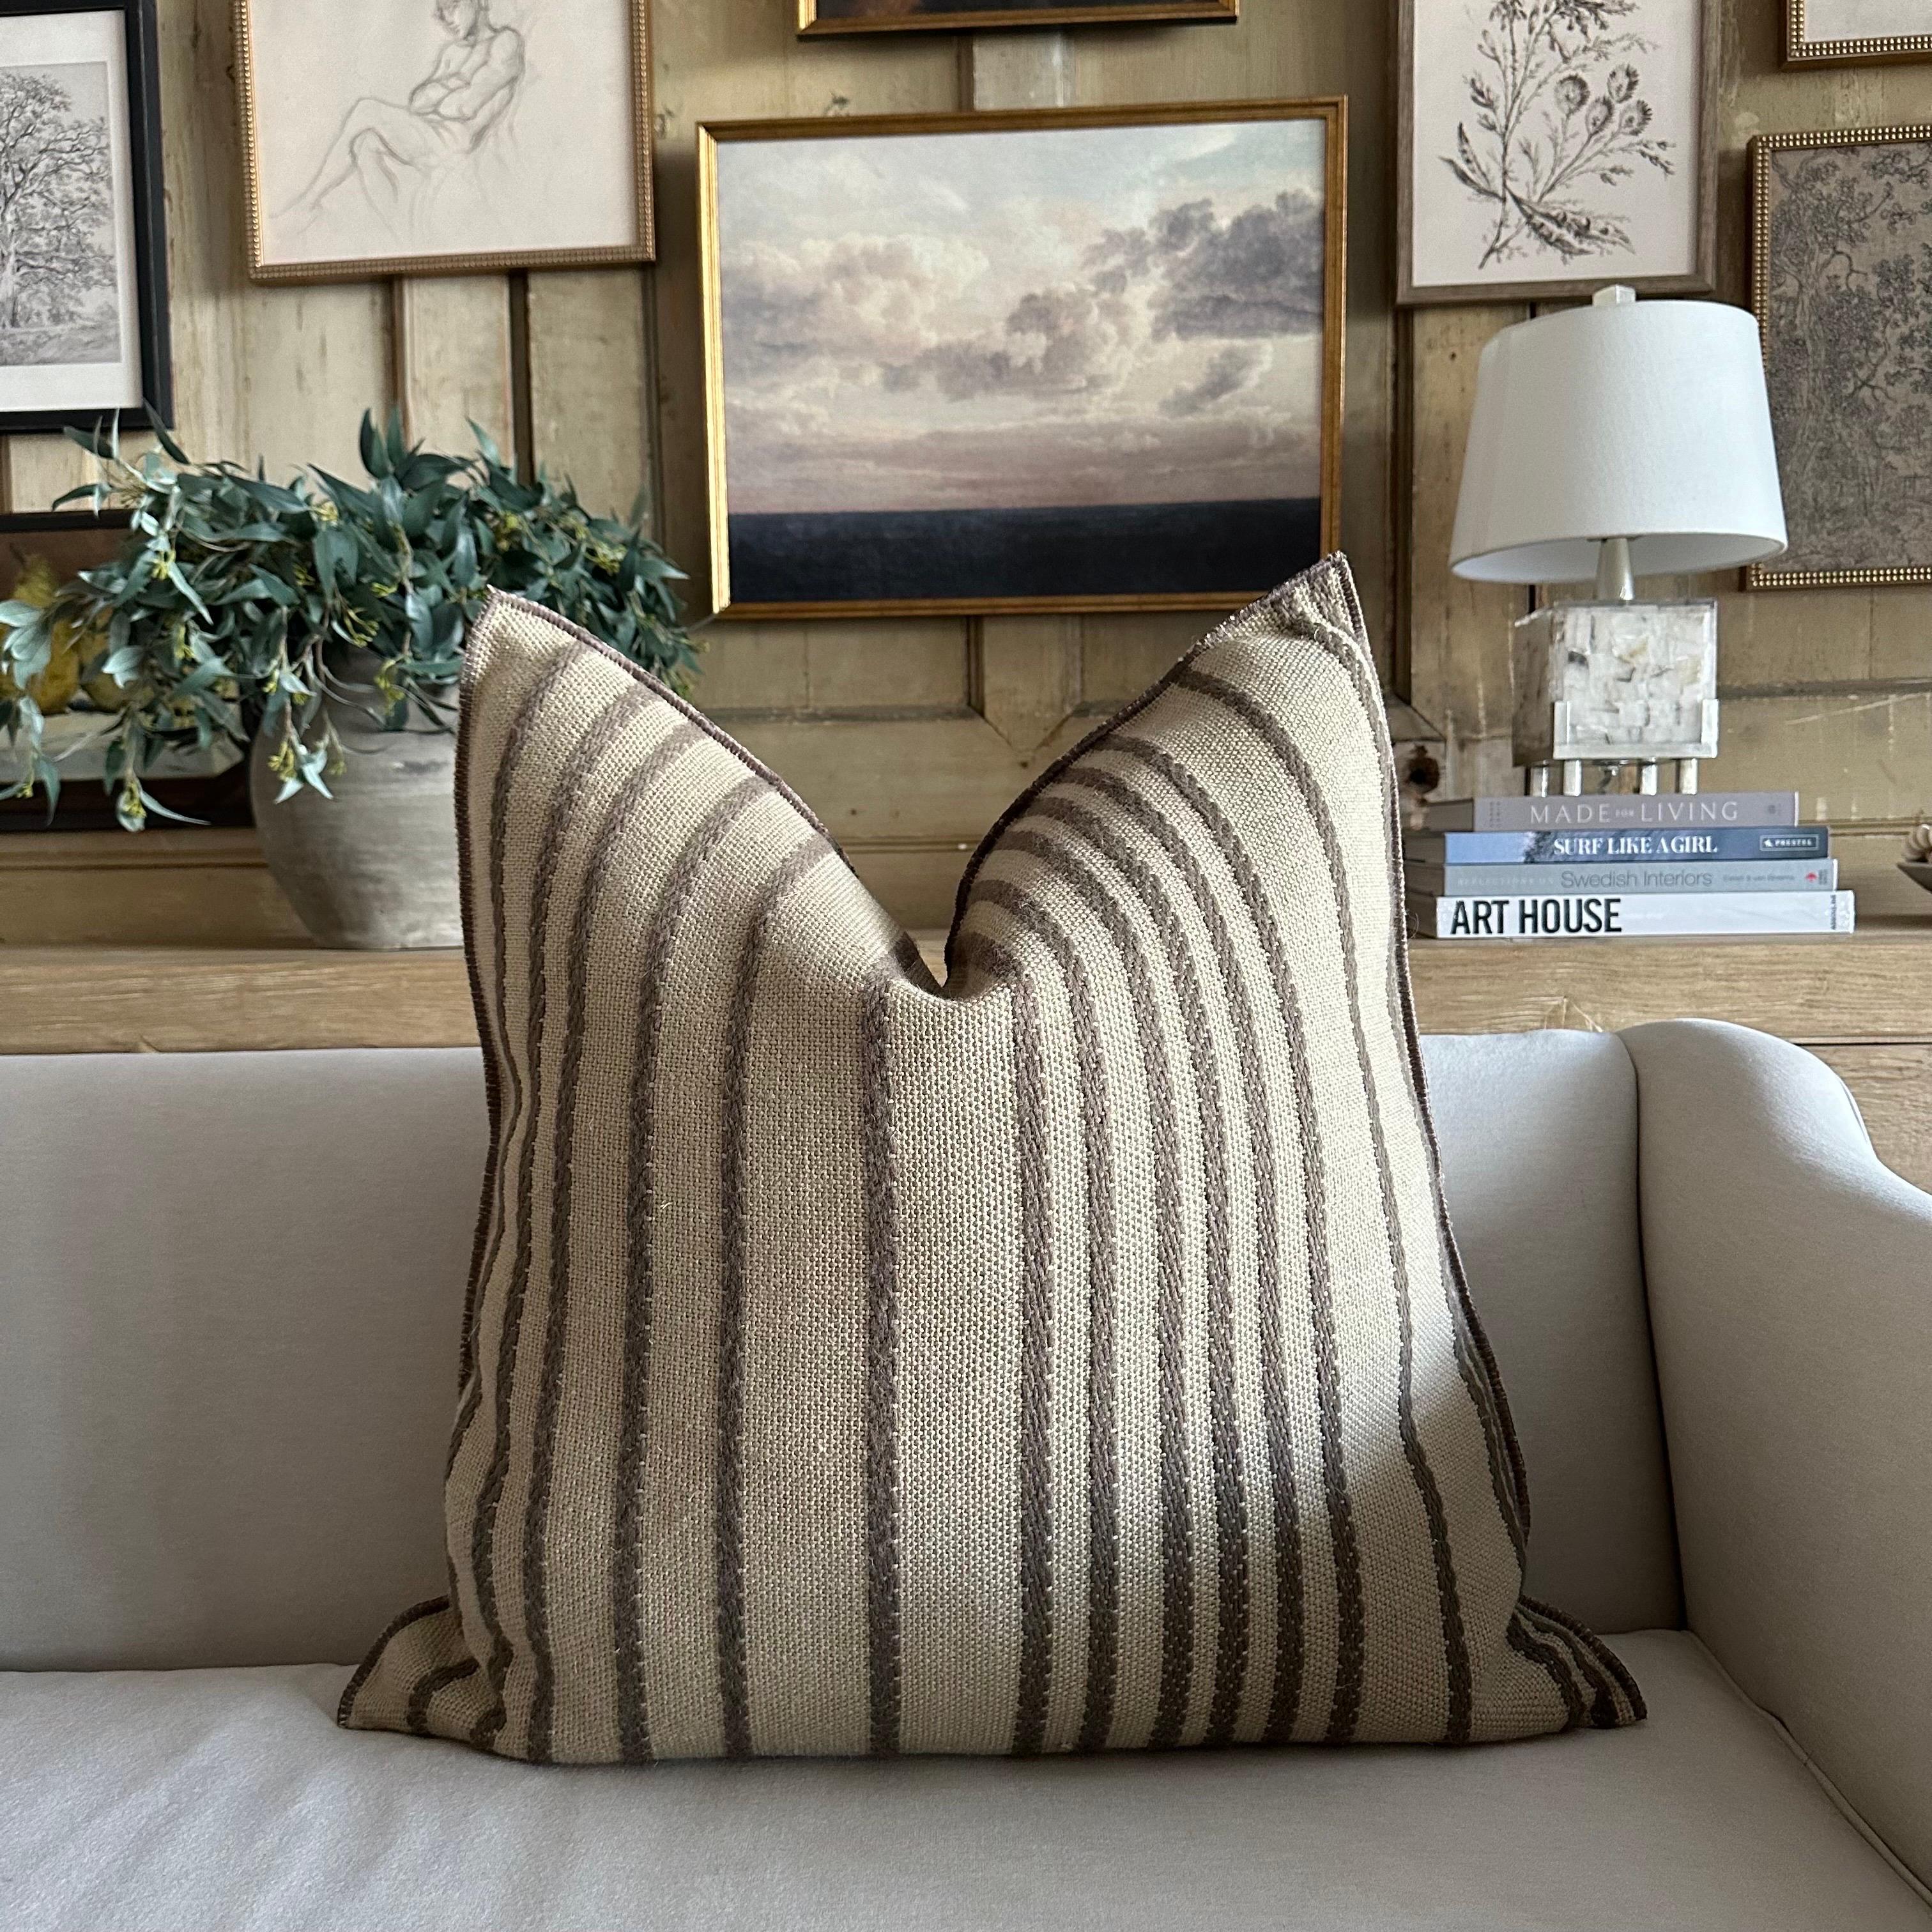 MDV Embroidered Myre Rayure 
Color: Ecorce (a bronze with gray hues)
Size 26x26
A beautiful natural flax, heavy weight linen, with a deep dark gray bronze embroidered stripe pattern. 
These pillows are crafted from a luxurious wool, and linen blend,